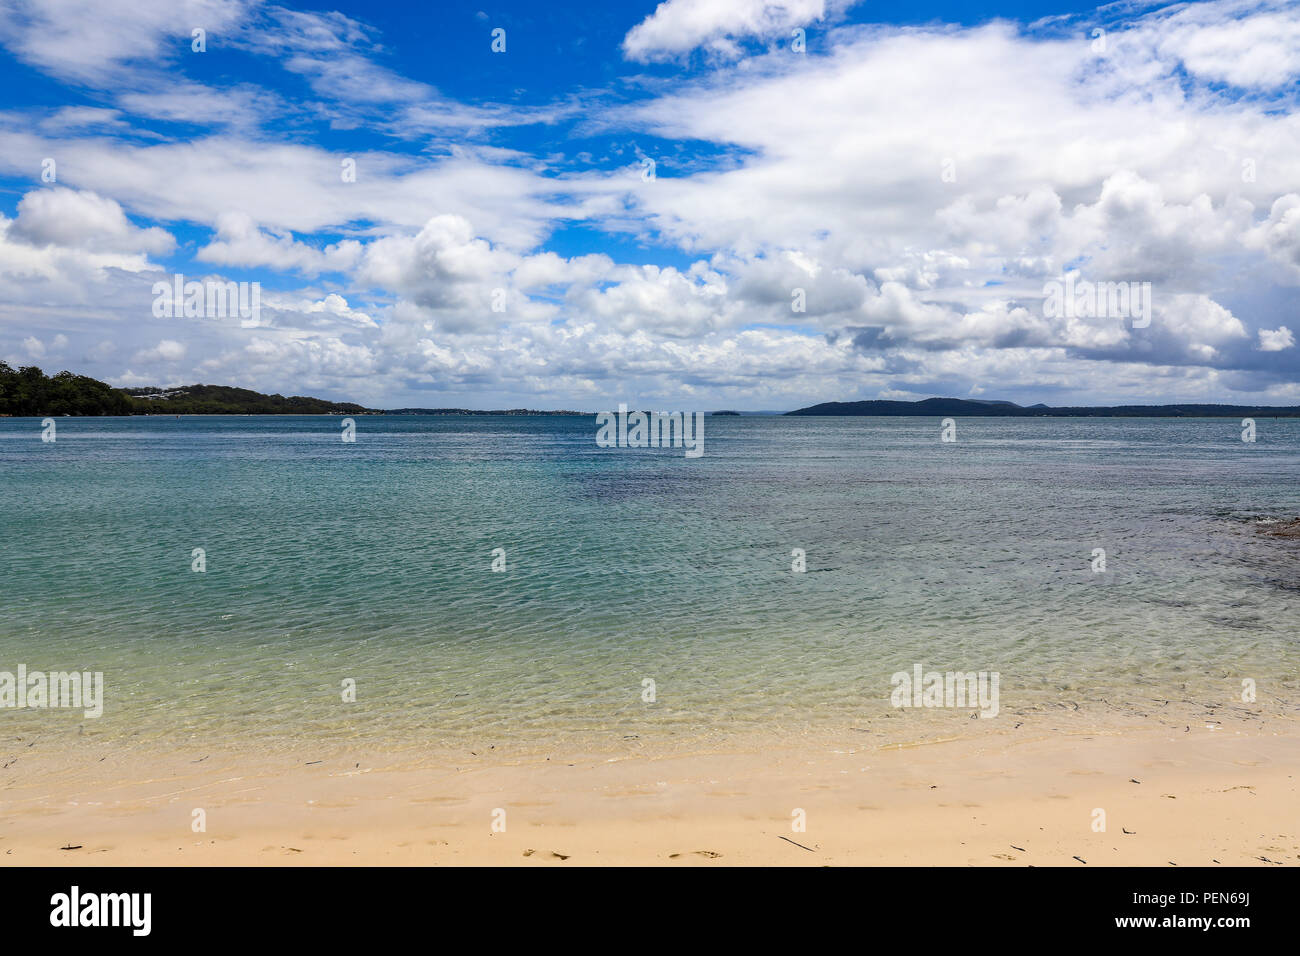 Scenic view of tranquil beach and cloudy blue sky Stock Photo